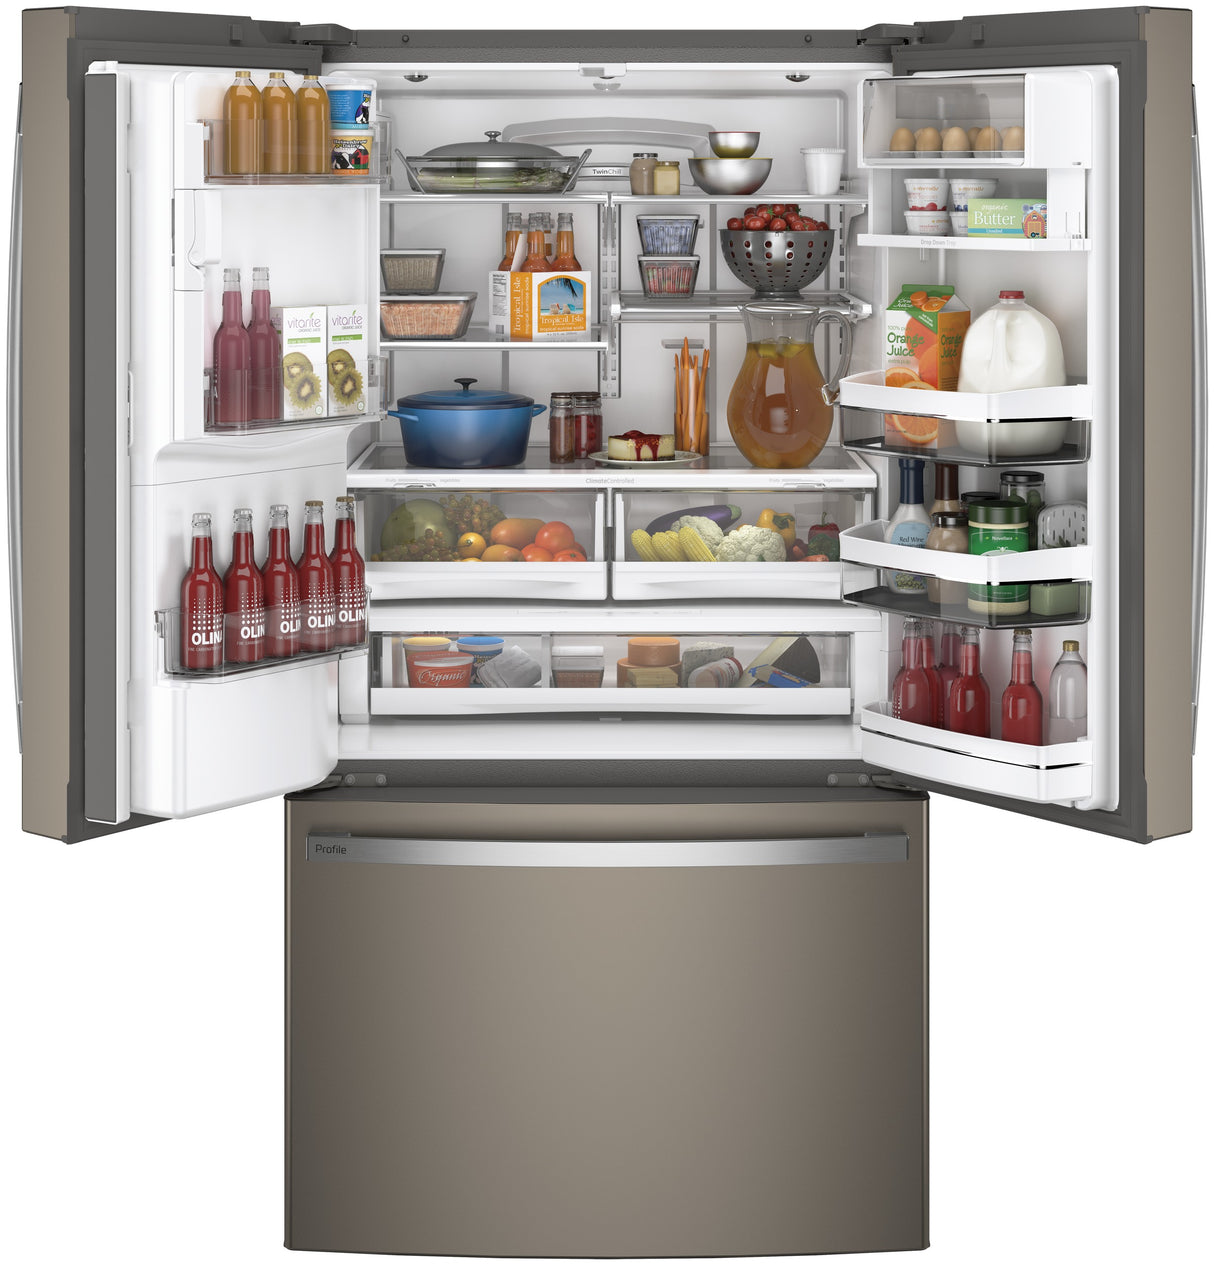 GE Profile(TM) Series ENERGY STAR(R) 27.7 Cu. Ft. French-Door Refrigerator with Hands-Free AutoFill - (PFE28KMKES)